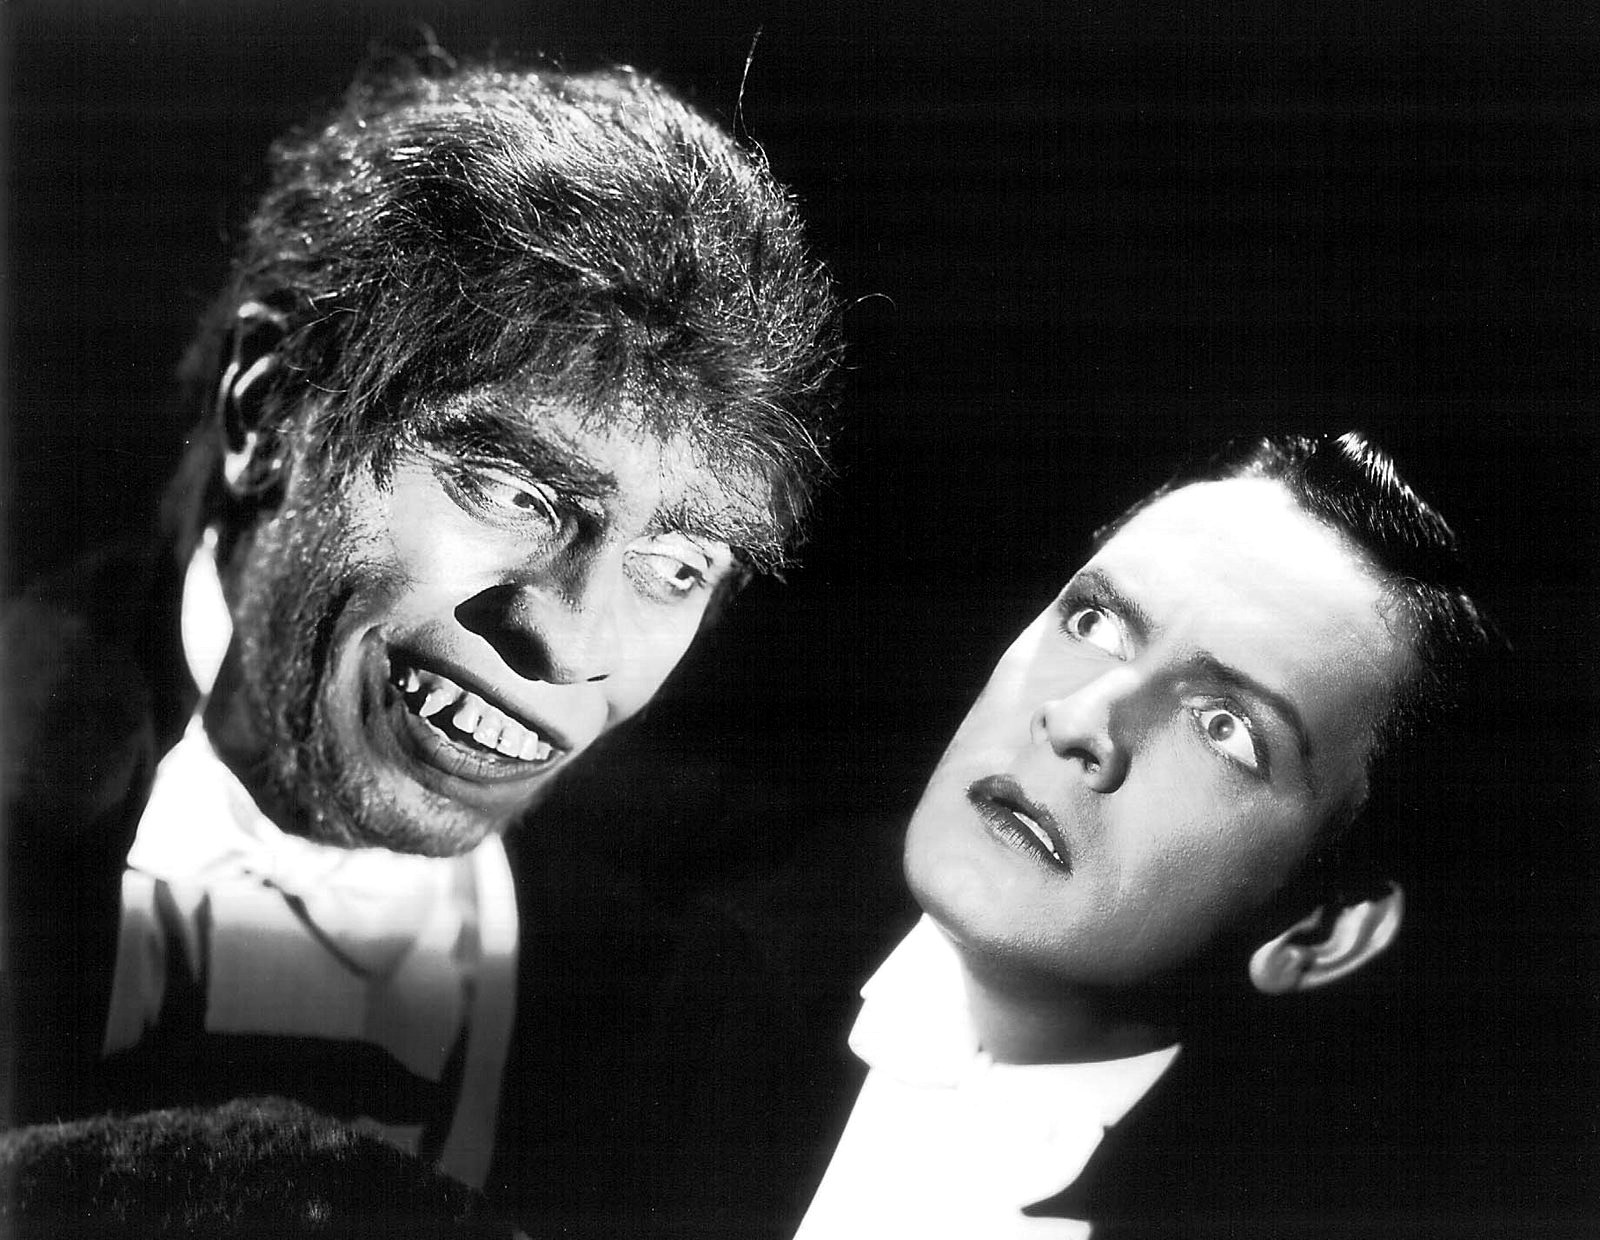 Darwin in Dr Jekyll and Mr Hyde